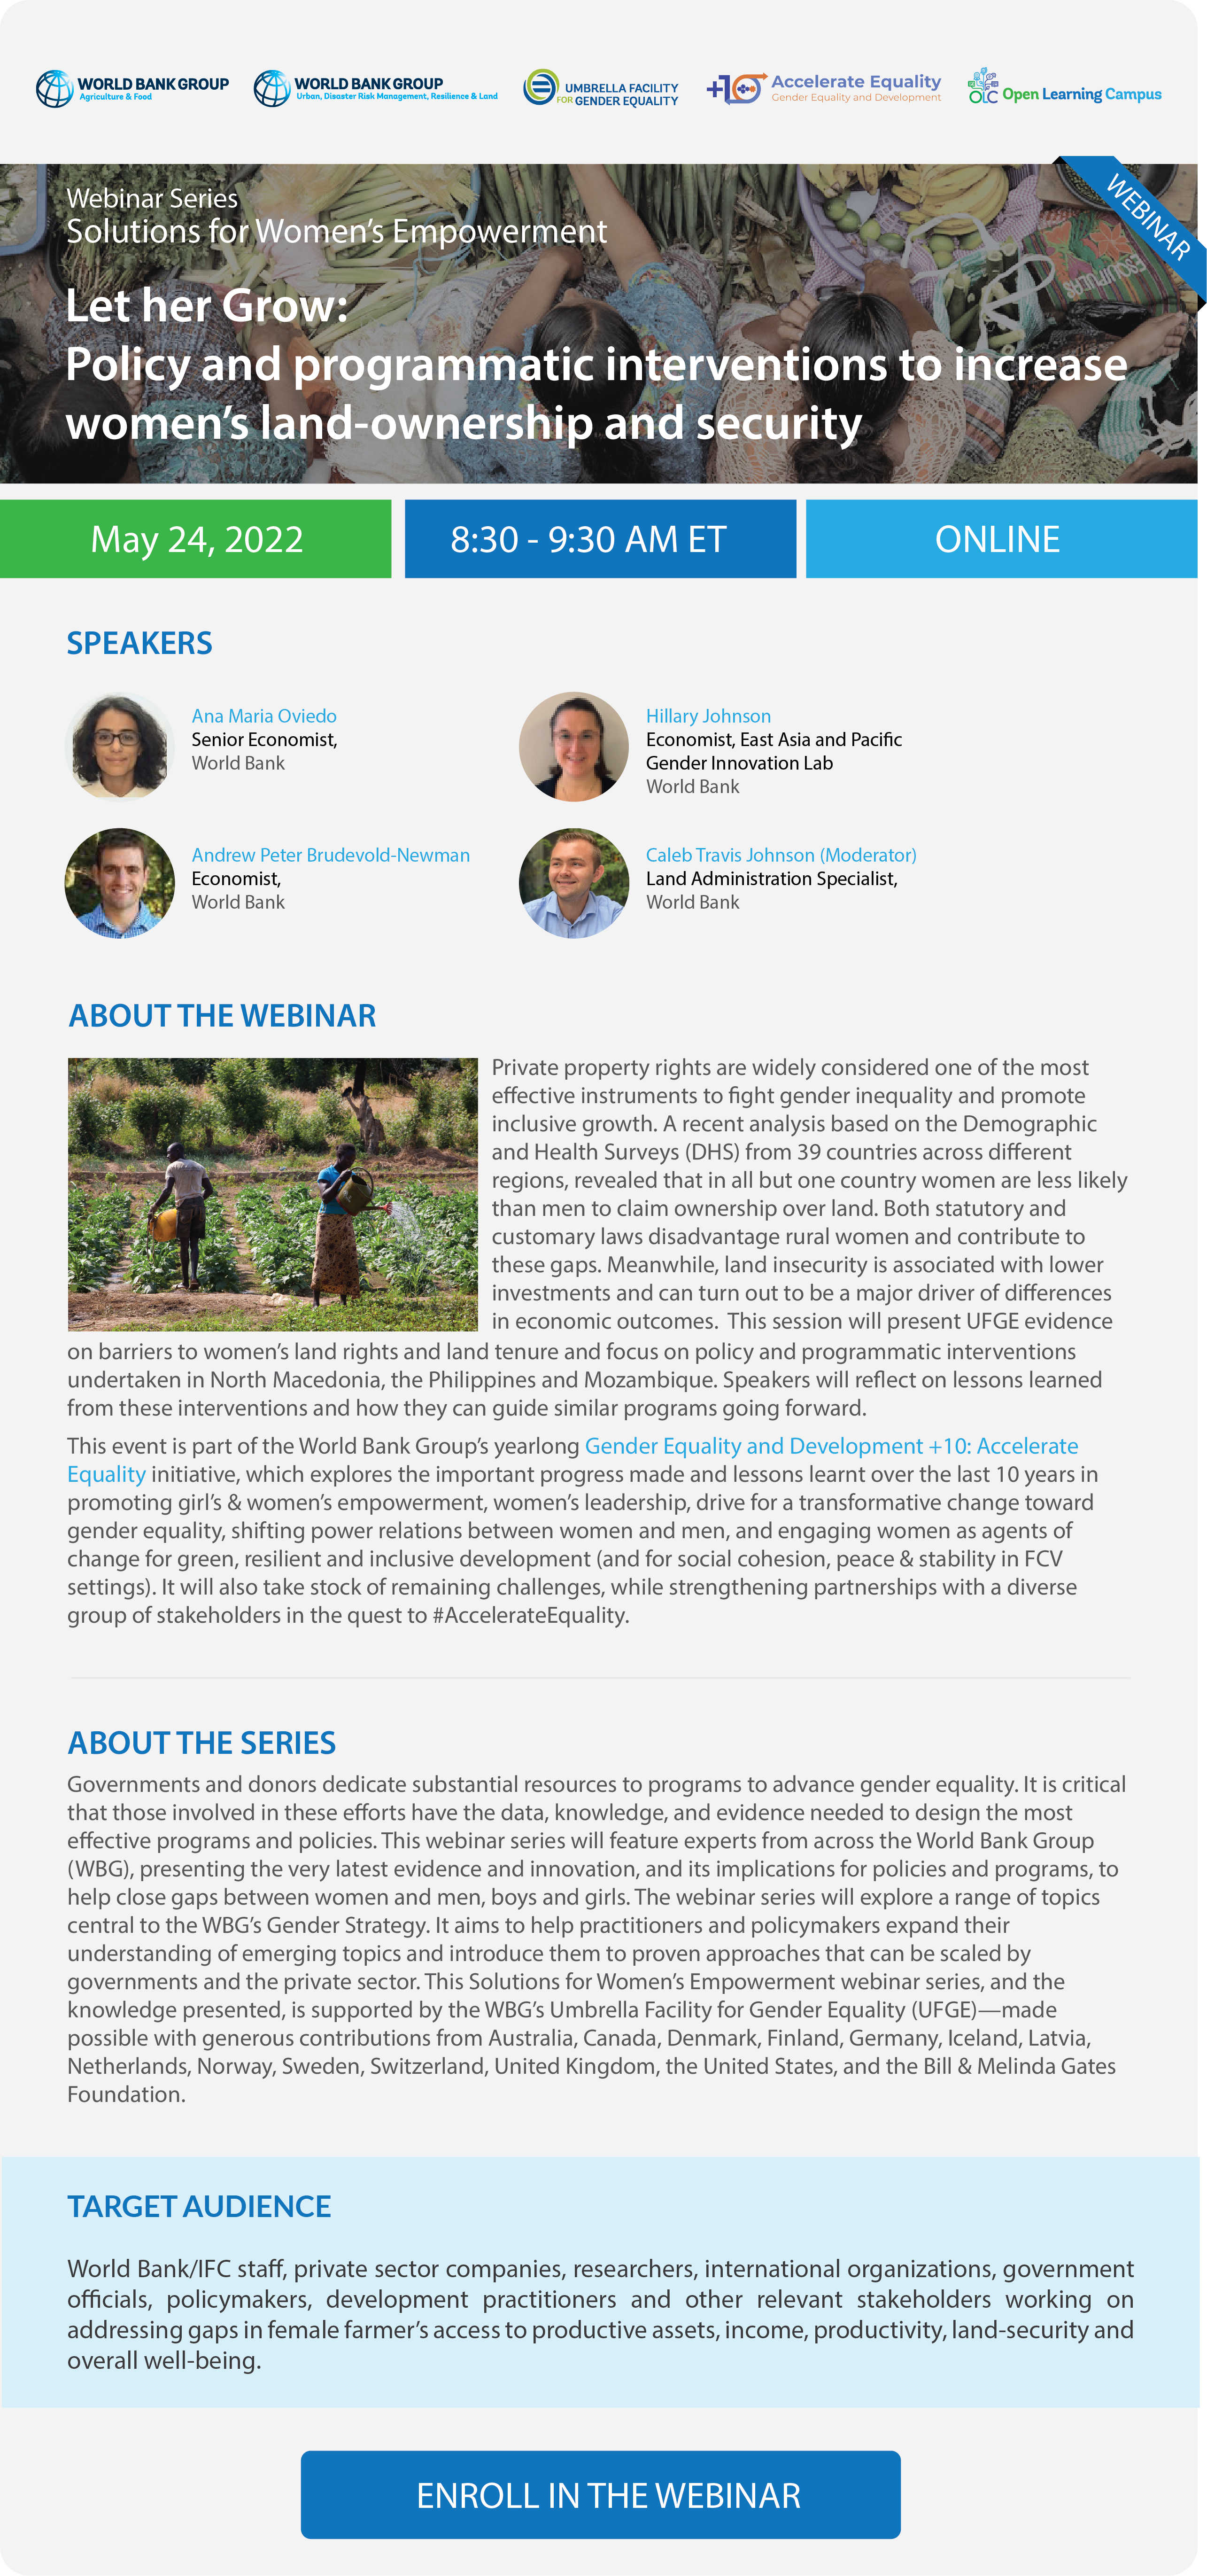 Webinar Invitation | Let her Grow: Policy and programmatic interventions to increase women’s land-ownership and security | May 24, 2022  8:30-9:30 am ET